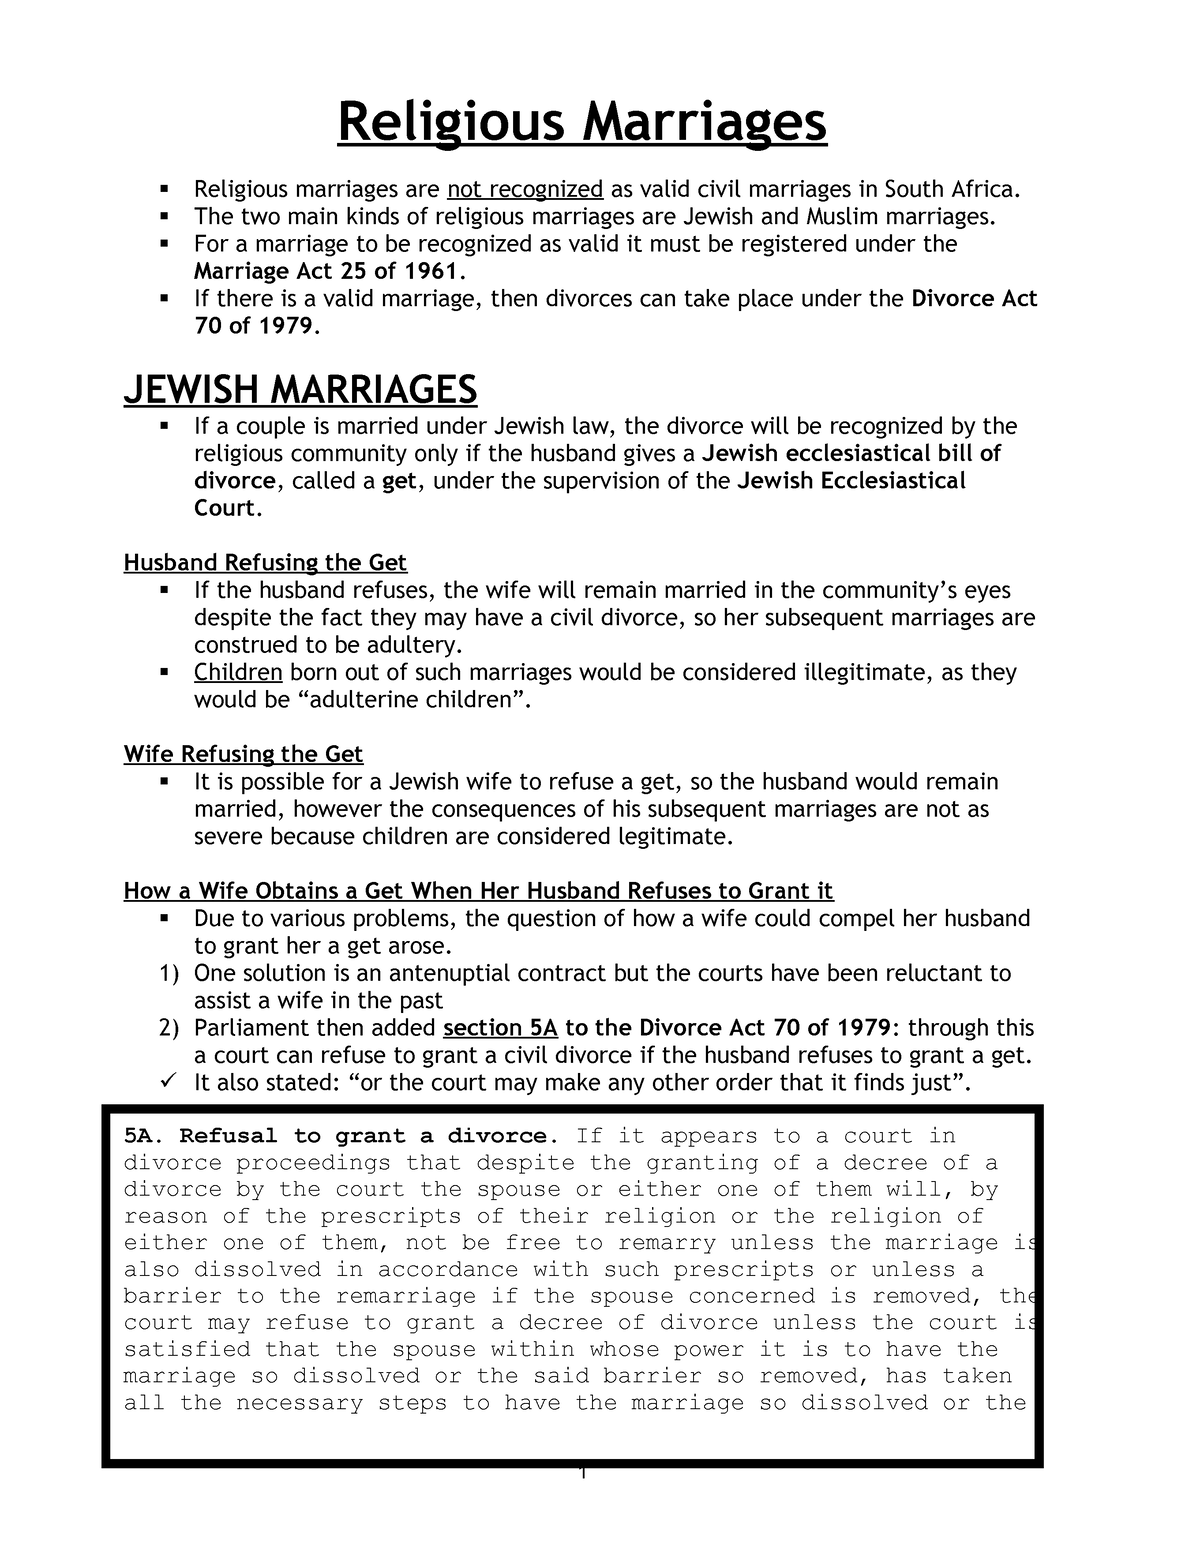 christian marriage research paper